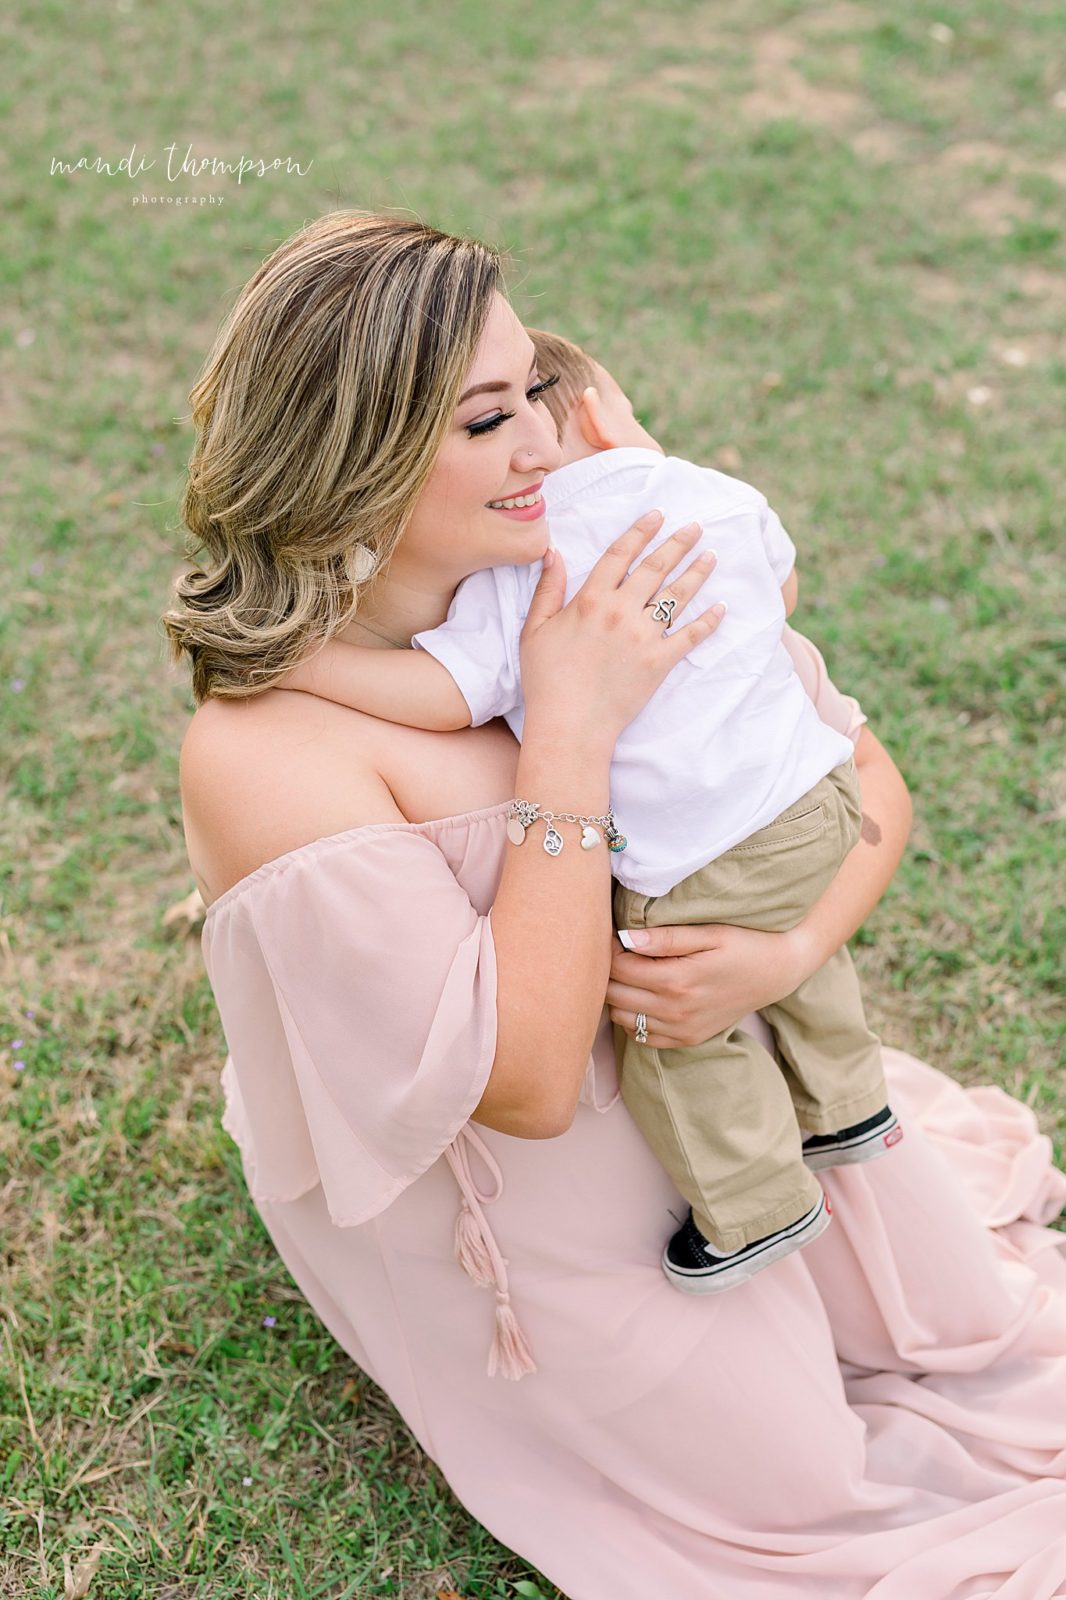 MOMMY & ME FIRST BIRTHDAY SESSION